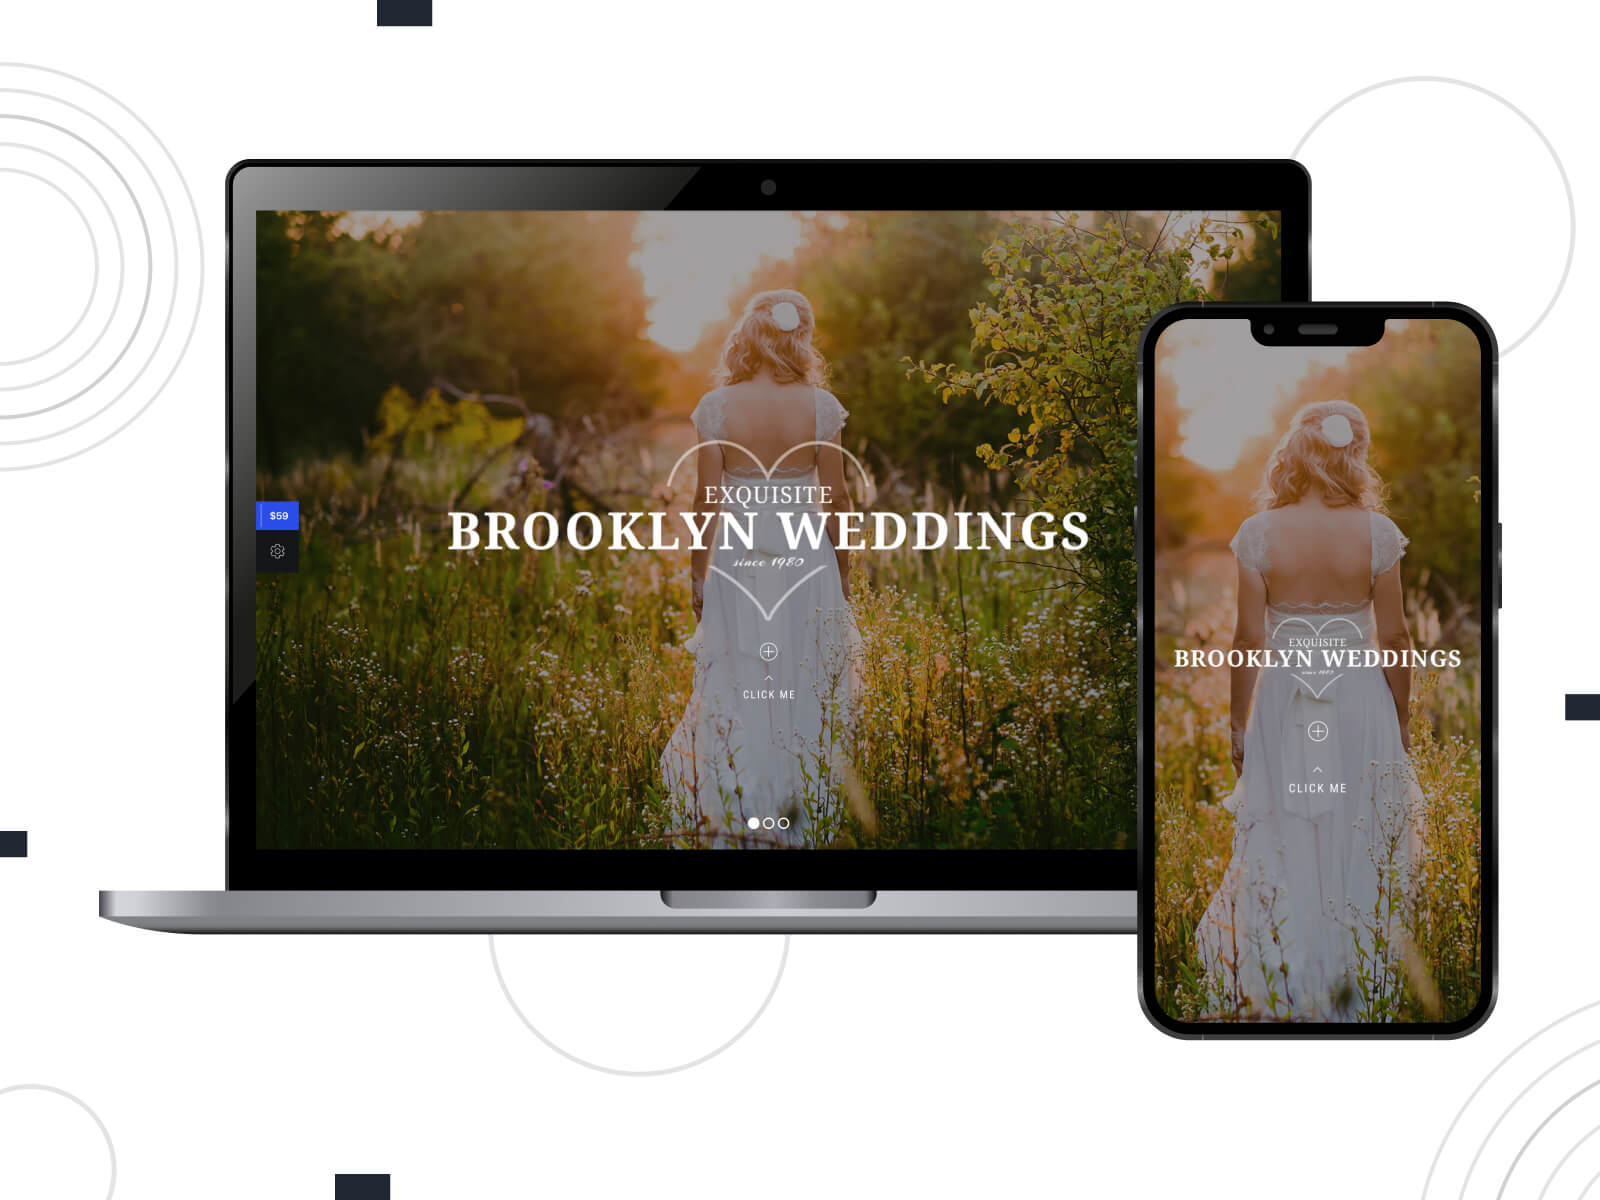 Illustration of Brooklyn - dim, rich, WordPress themes tailored for destination weddings, including travel and accommodation features in sienna, gray, and dark olive green color gradation.